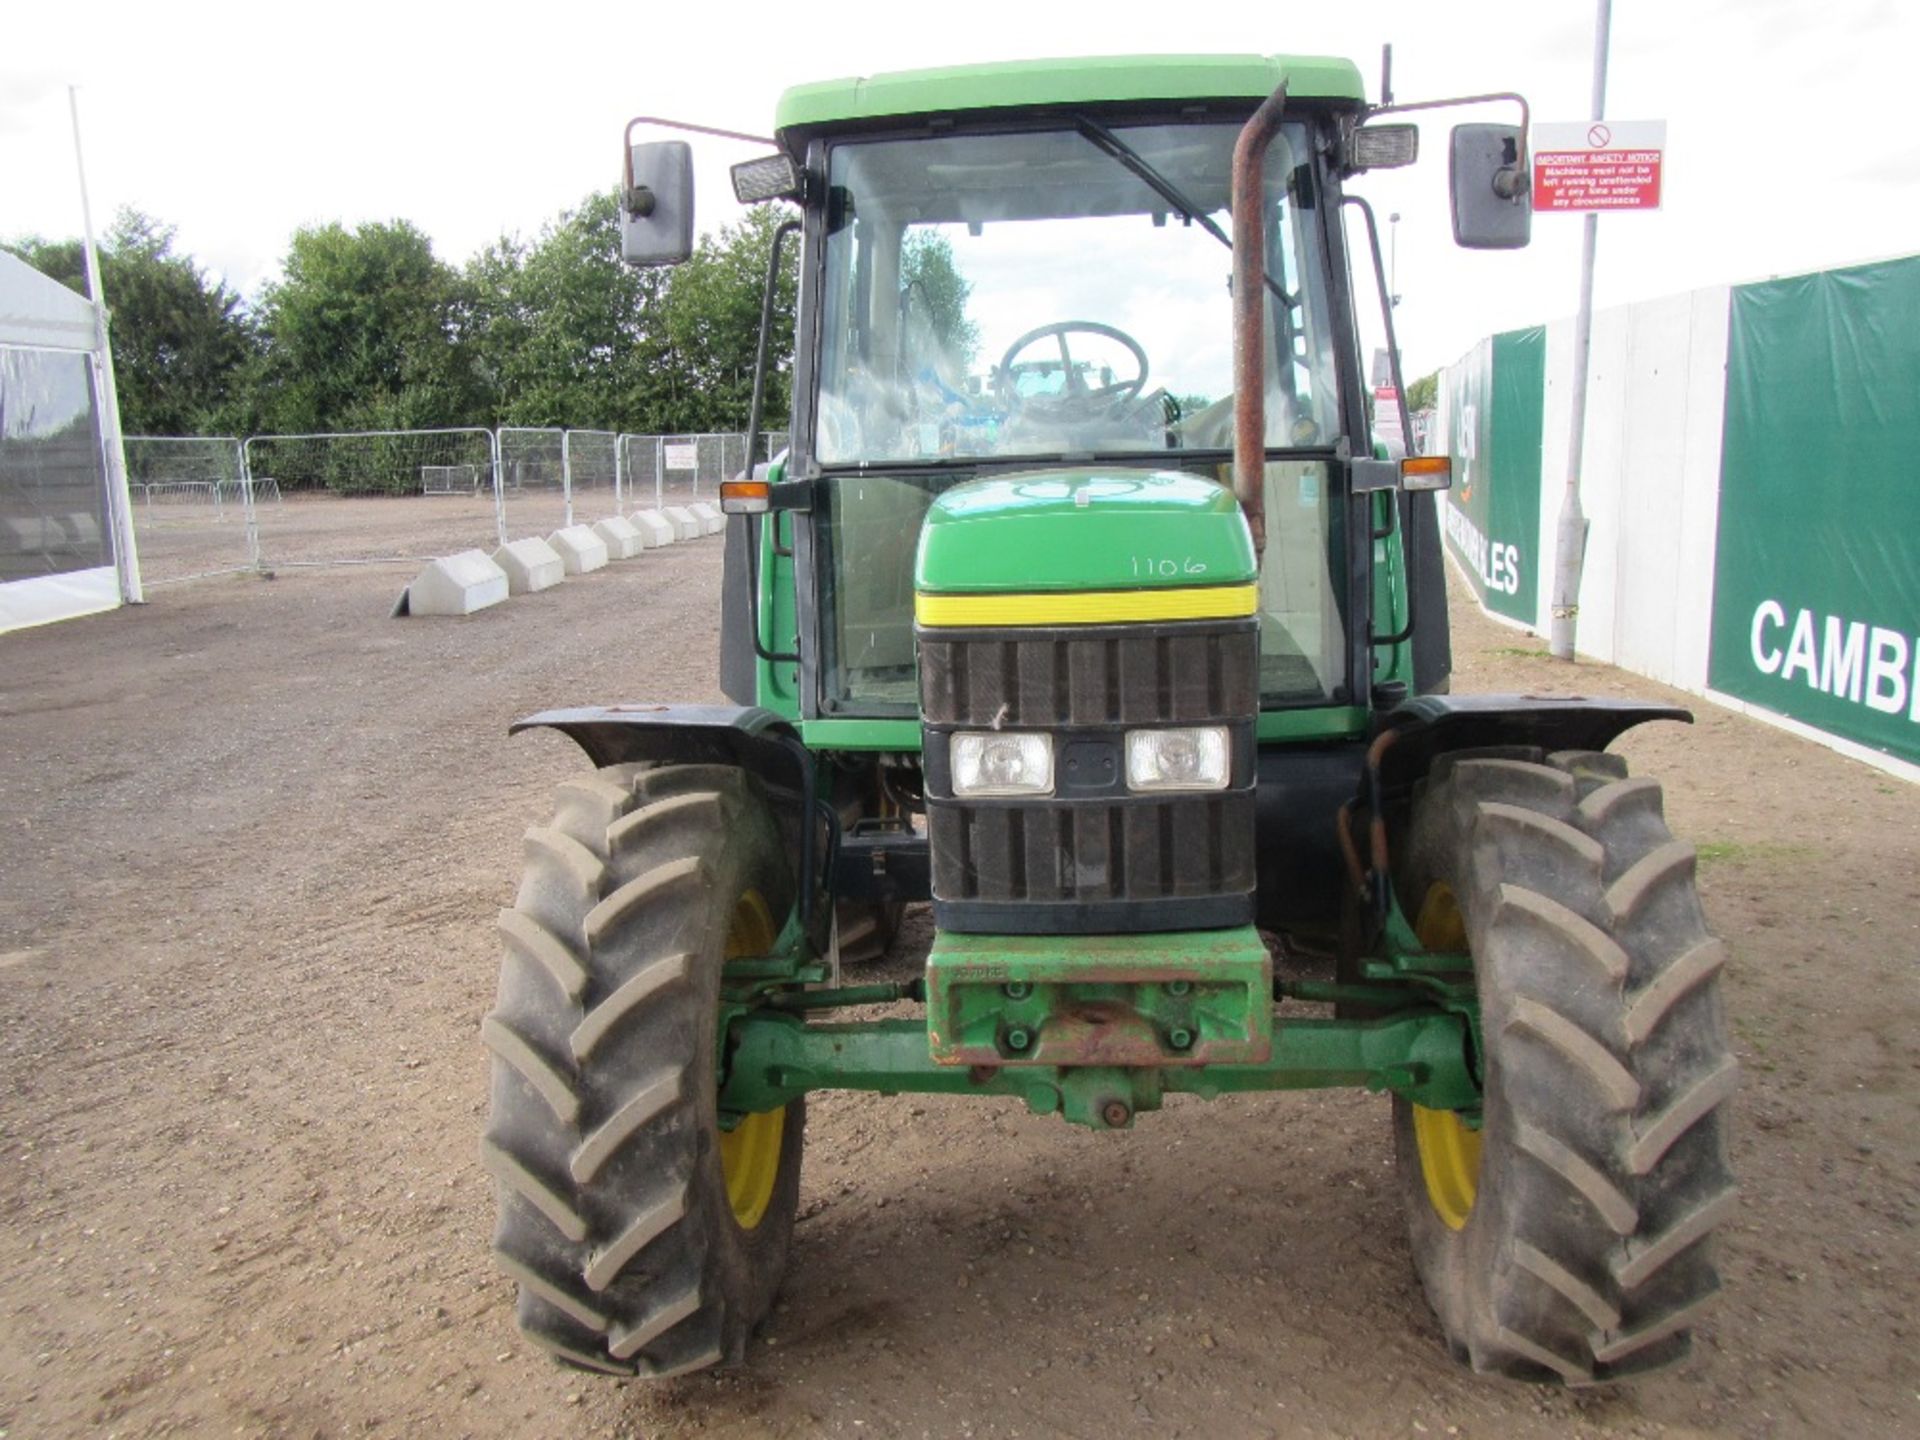 2000 John Deere 6010 4wd Tractor with Air Con & Creeper Gear. From Veg Rig. 4542 hrs. Reg No X153 - Image 2 of 17